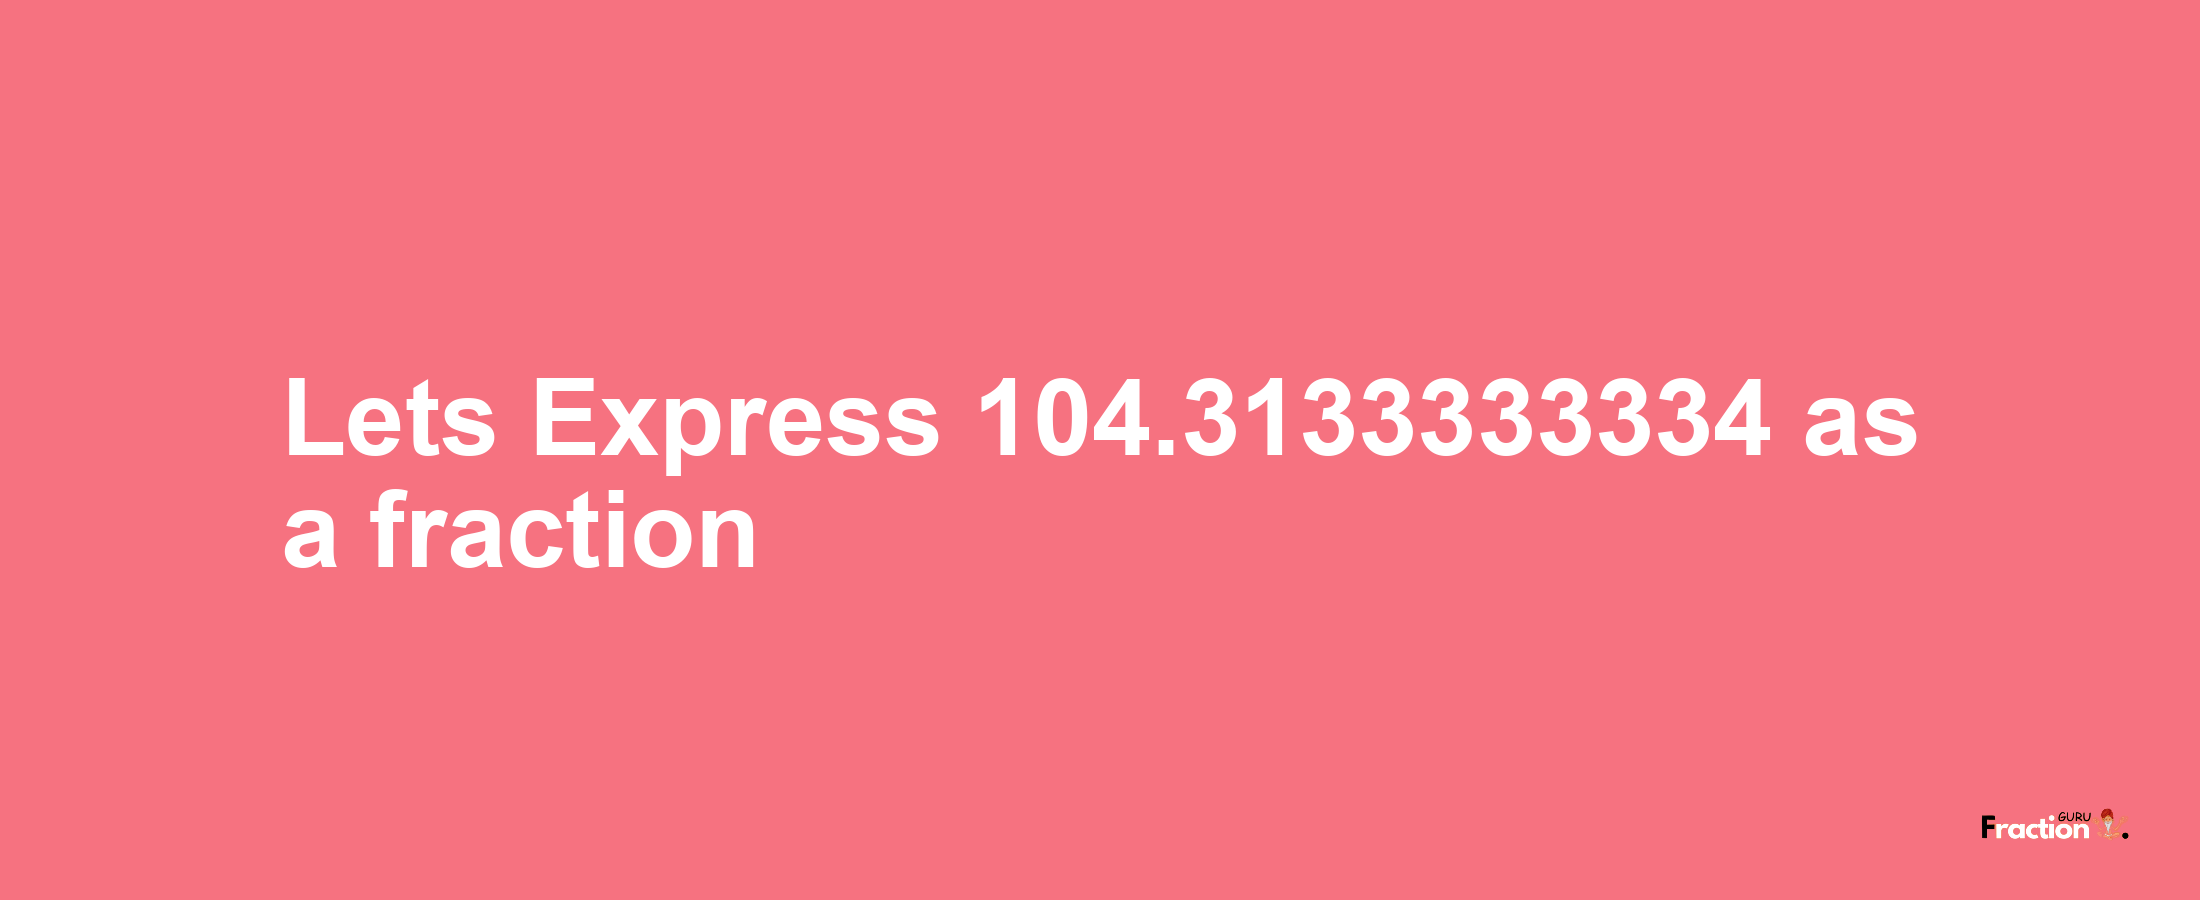 Lets Express 104.3133333334 as afraction